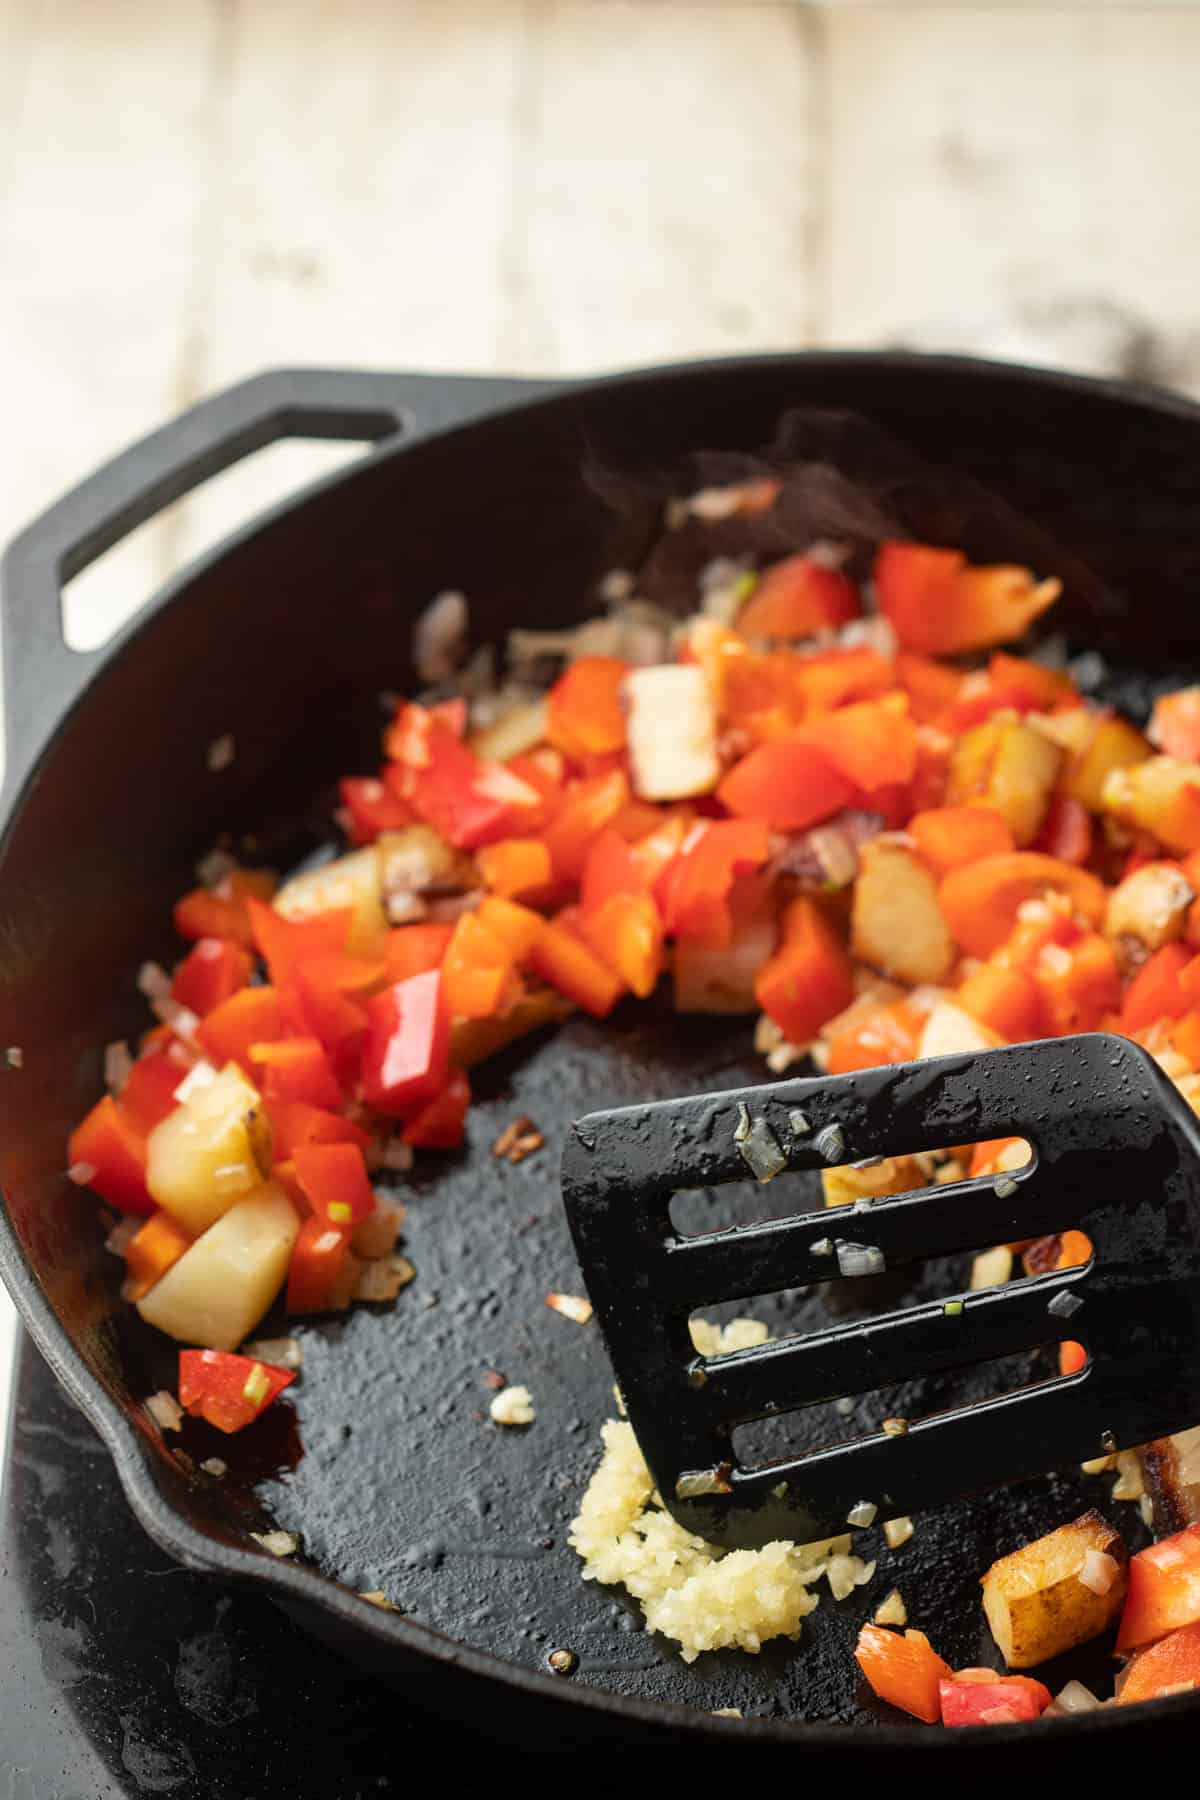 Garlic cooking in a skillet with peppers, potatoes and onions.